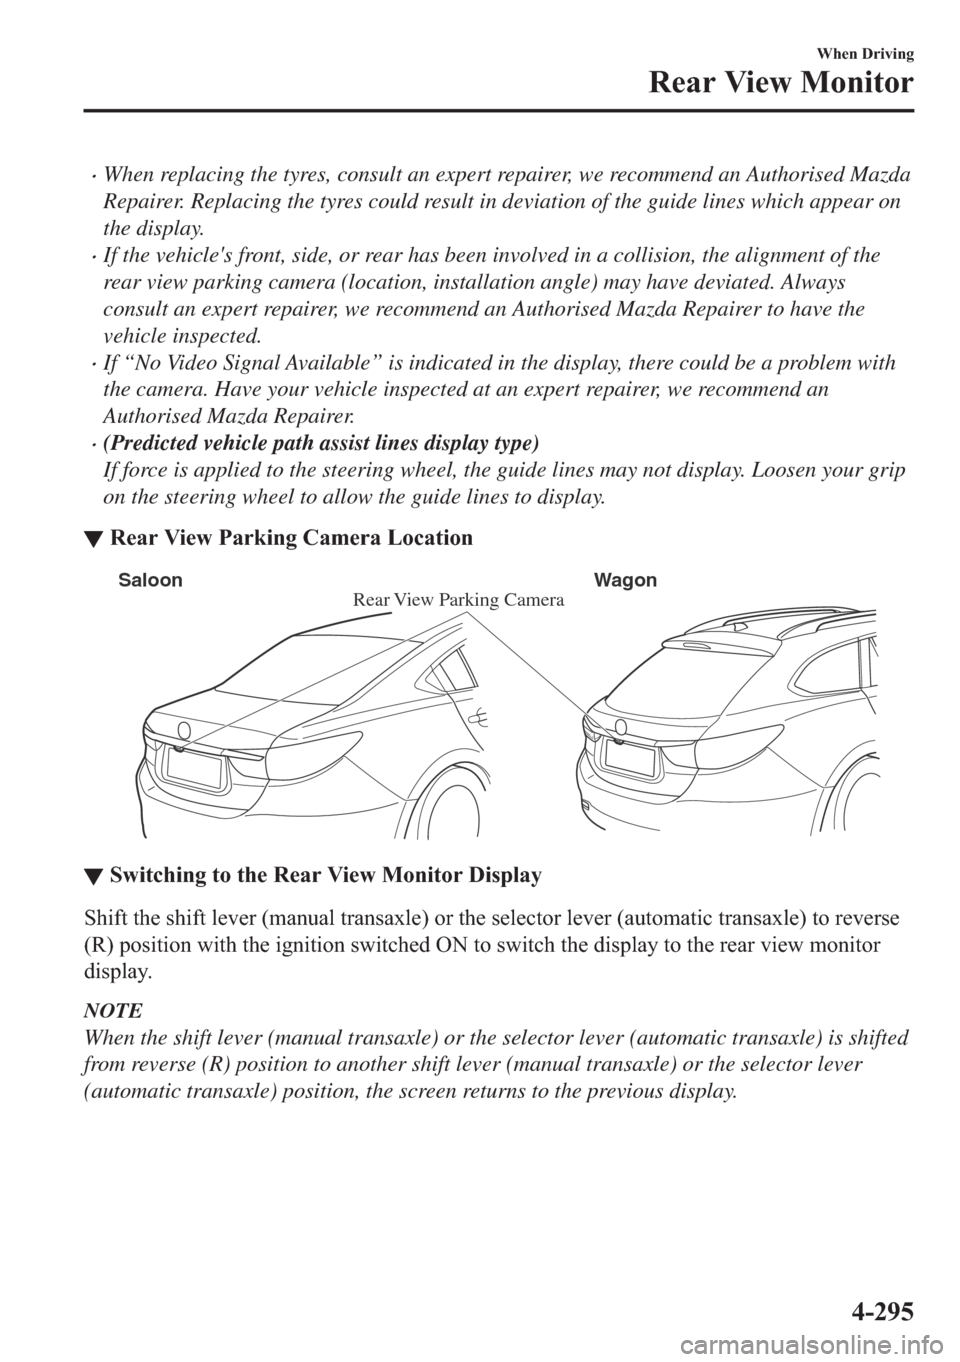 MAZDA MODEL 6 2018  Owners Manual (in English) �xWhen replacing the tyres, consult an expert repairer, we recommend an Authorised Mazda
Repairer. Replacing the tyres could result in deviation of the guide lines which appear on
the display.
�xIf th